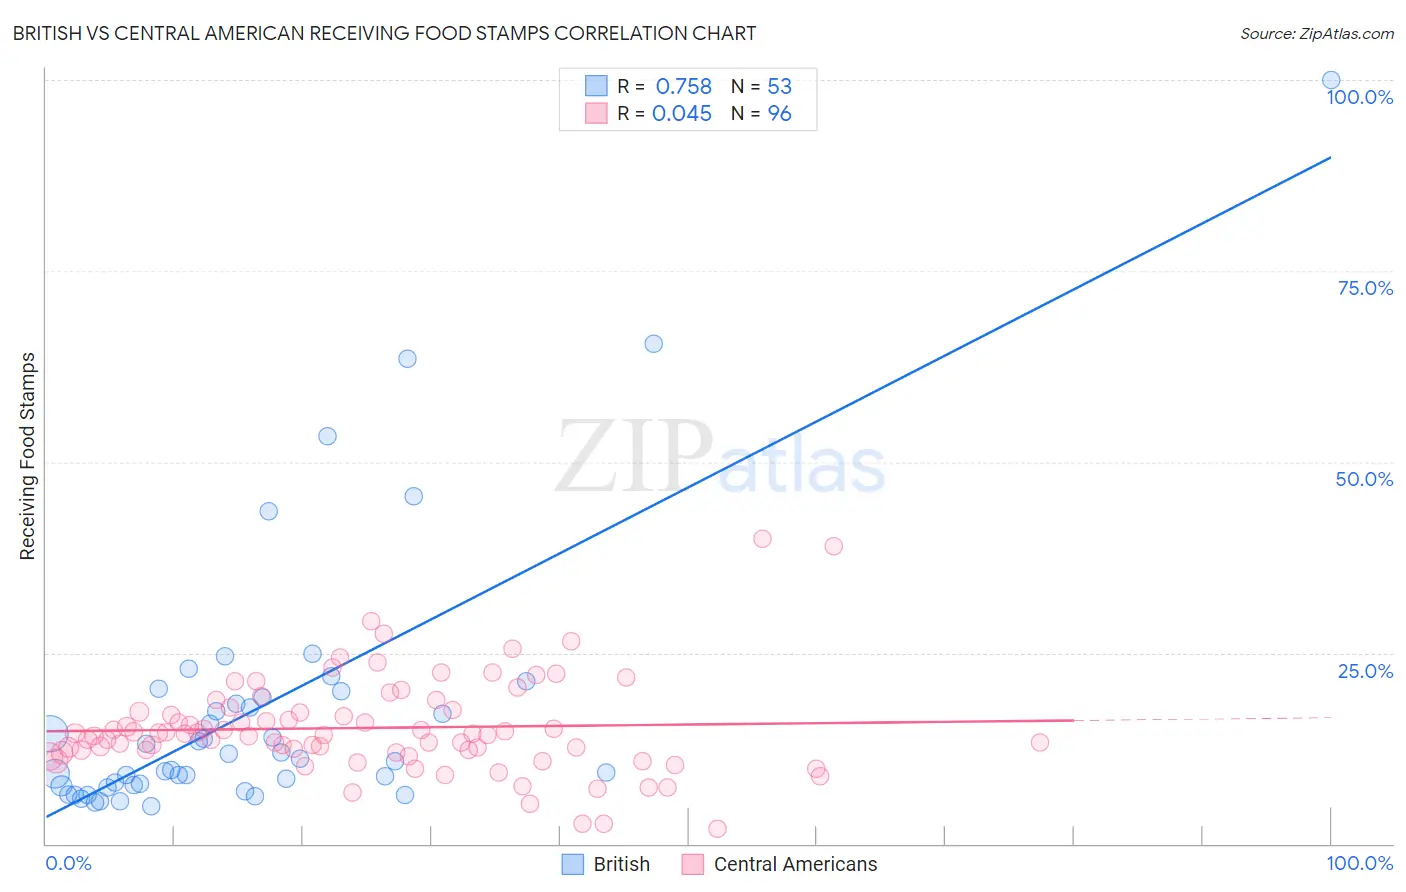 British vs Central American Receiving Food Stamps